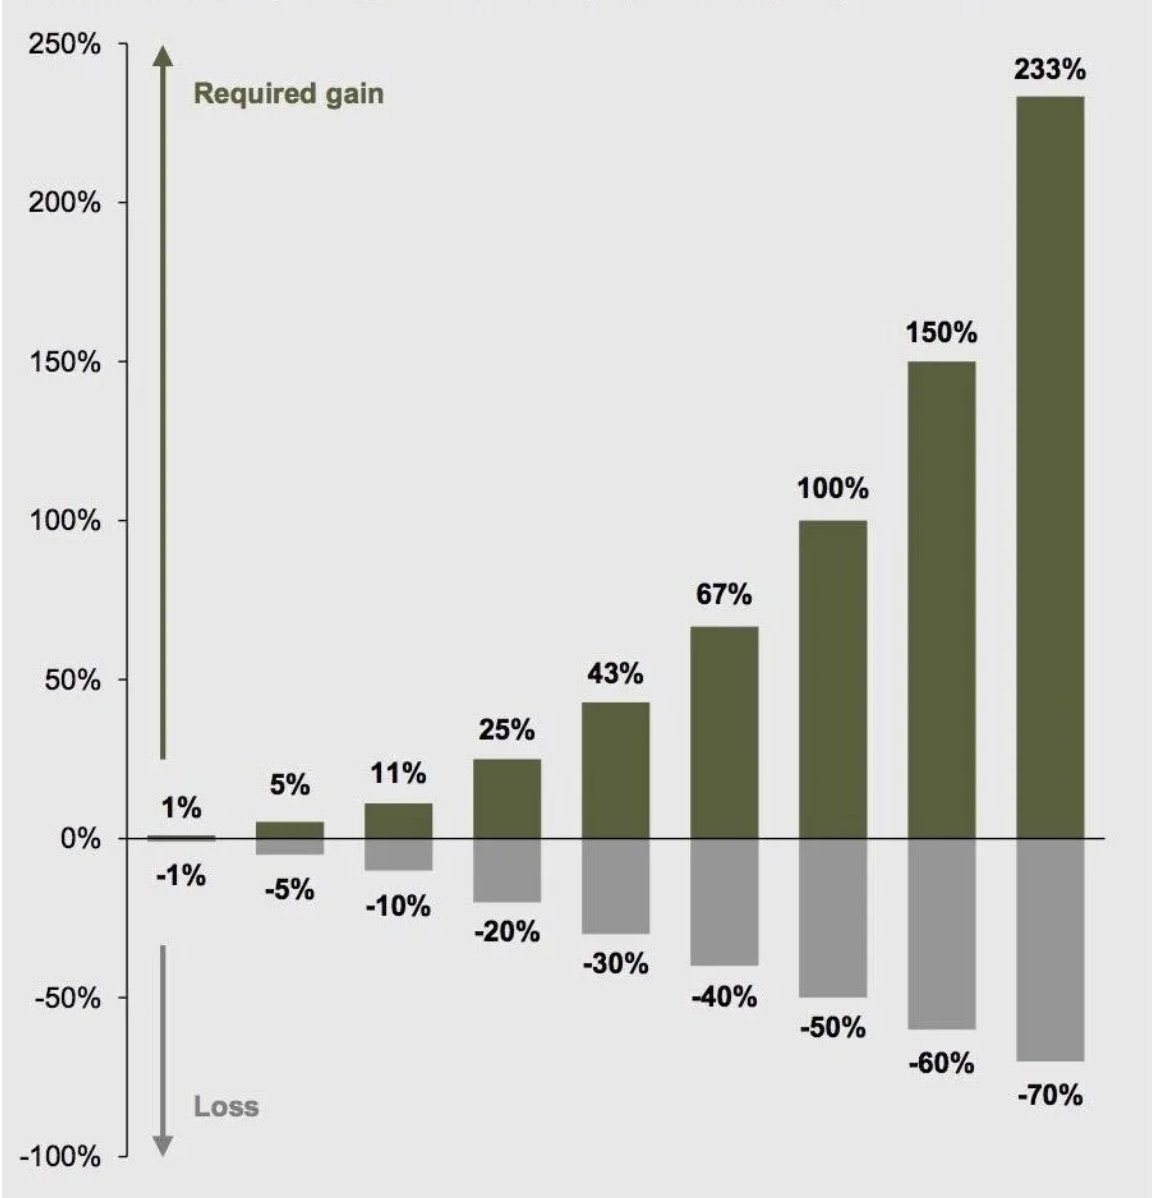 Green (required gain) and gray (loss) bar graph, illustrating how one needs a 100% gain to recover from a 50% loss in the stock markets.